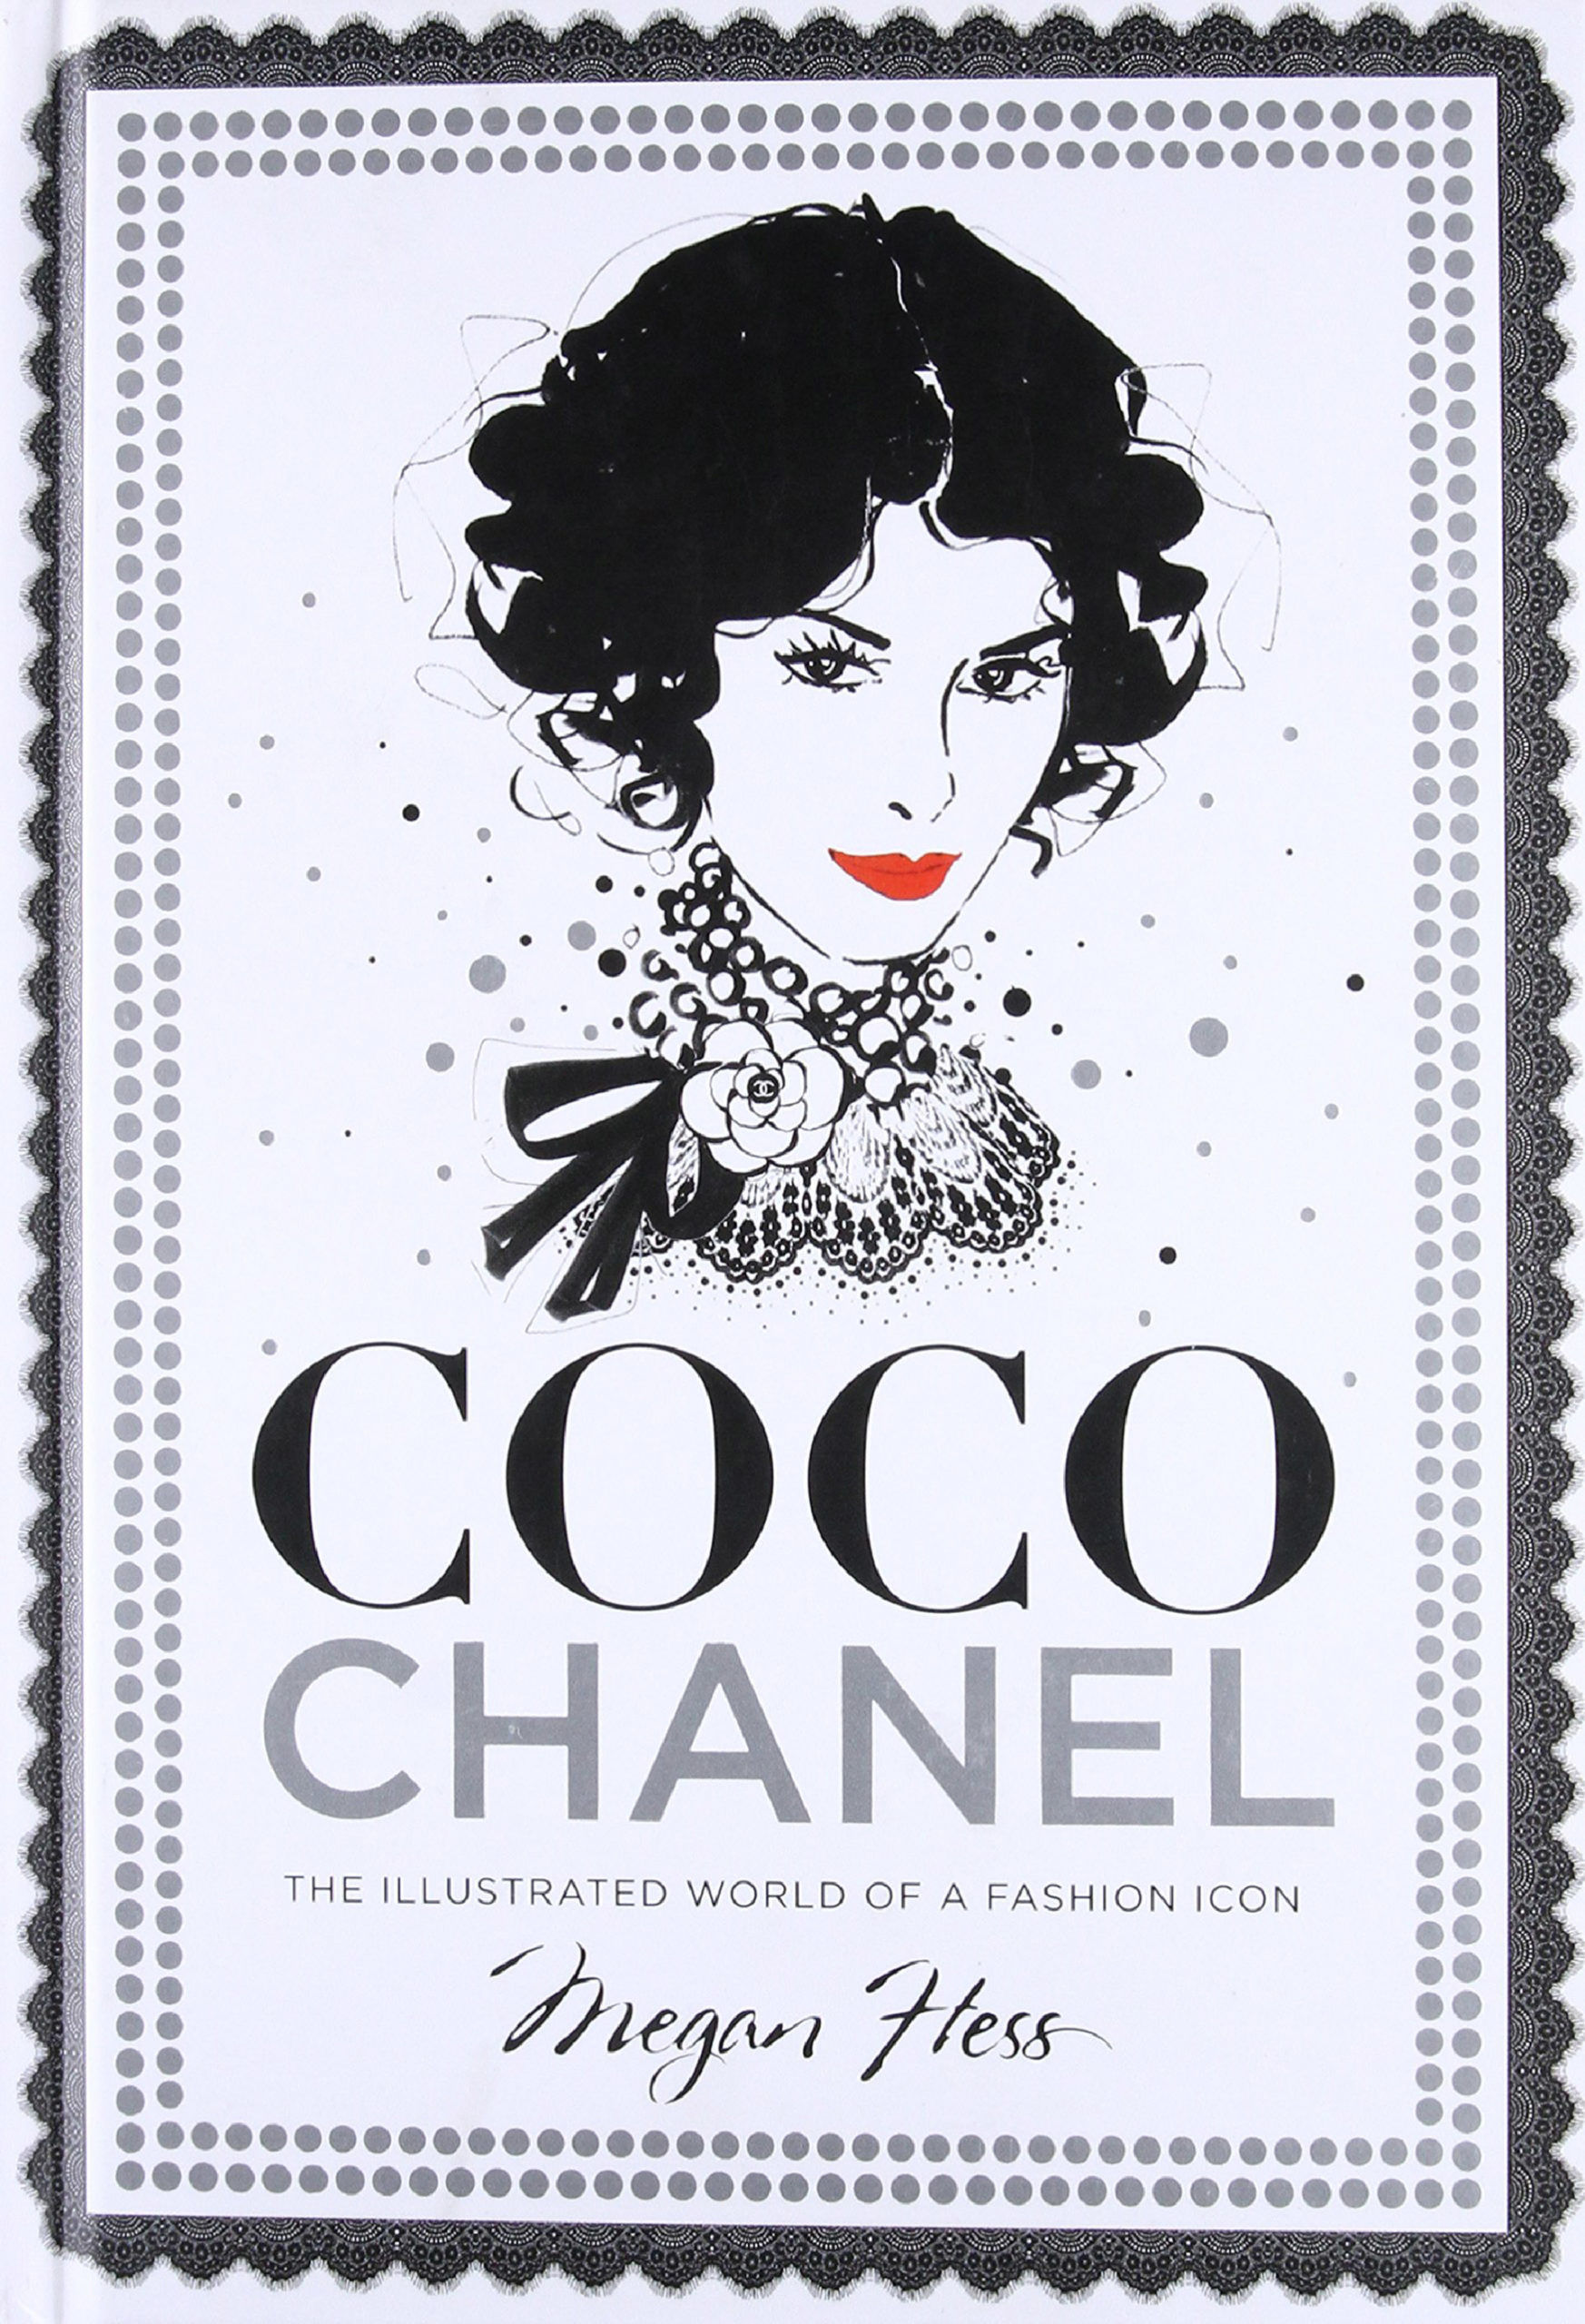 Style icon Coco Chanel - her legacy, style characteristics, iconic designs,  influence and style